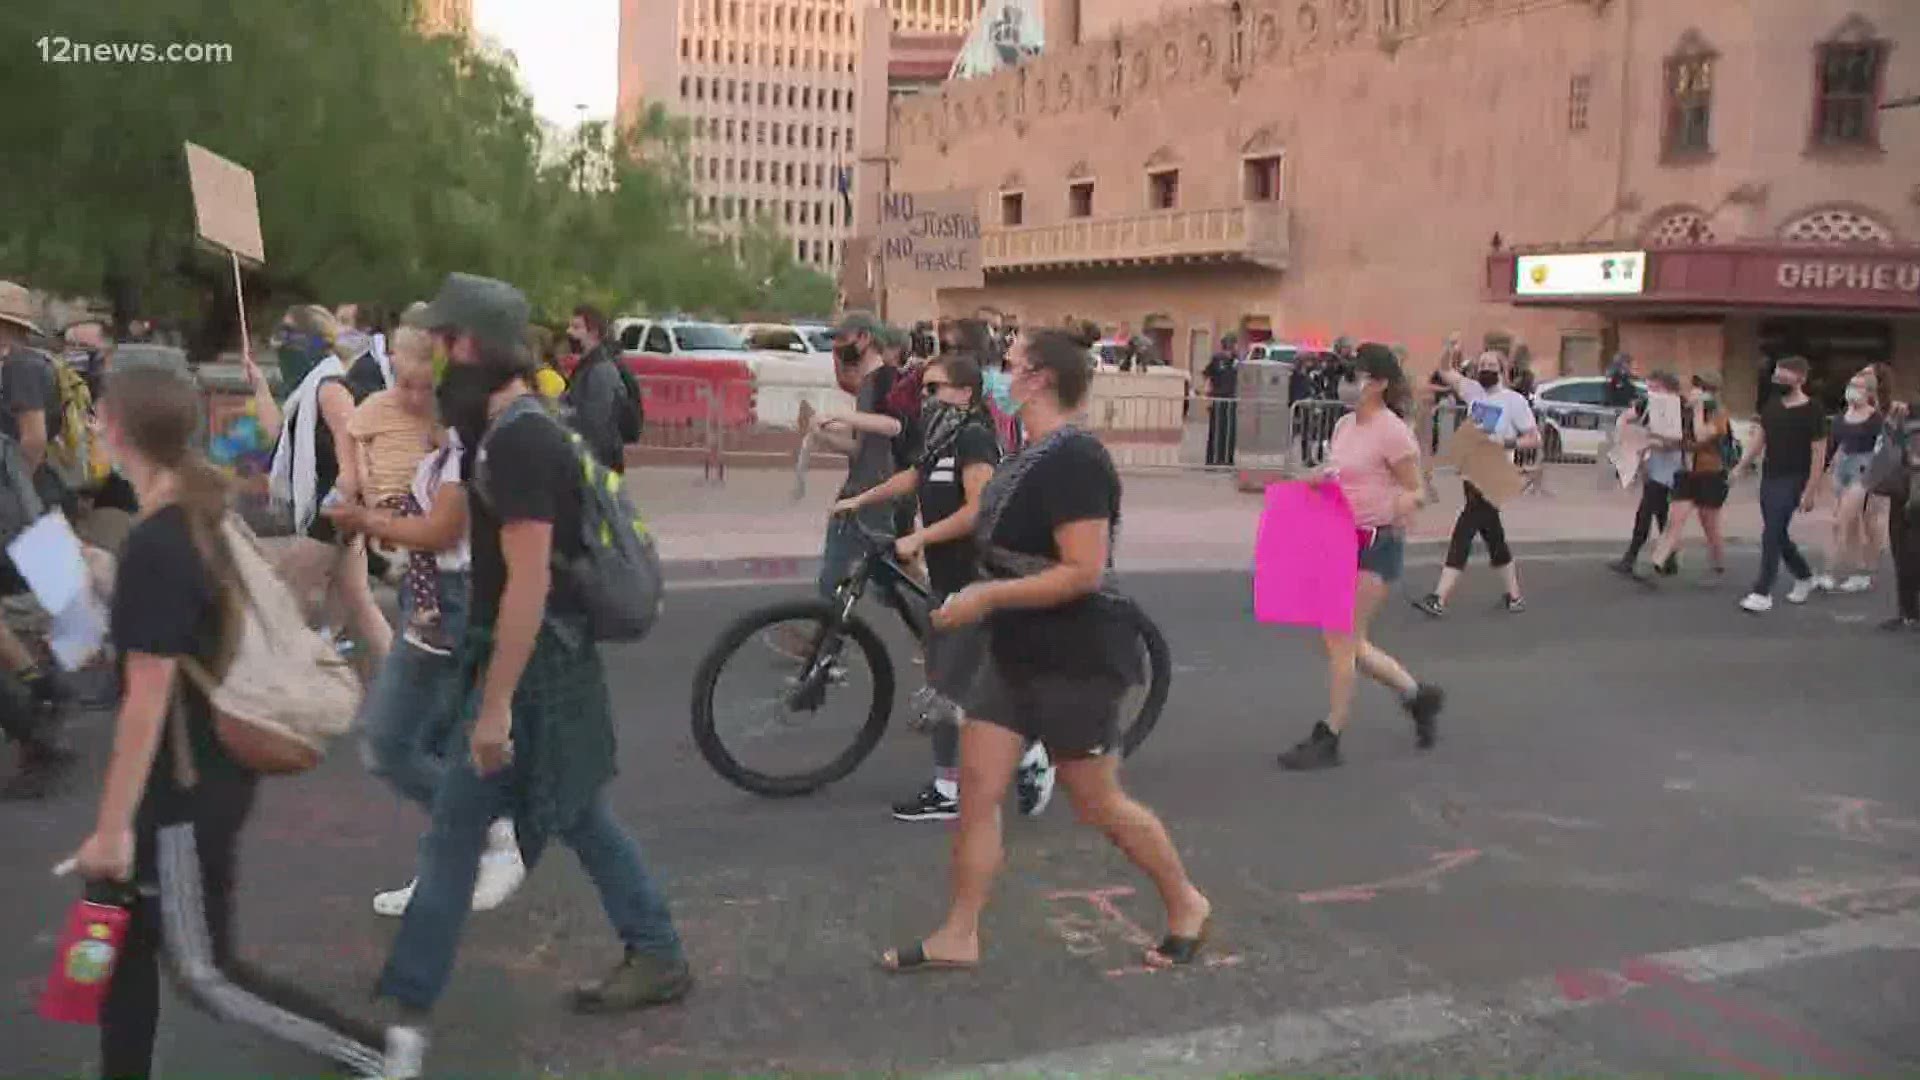 According to Phoenix police, there were no arrests made after protests in downtown Phoenix Monday night. Matt Yurus has more.